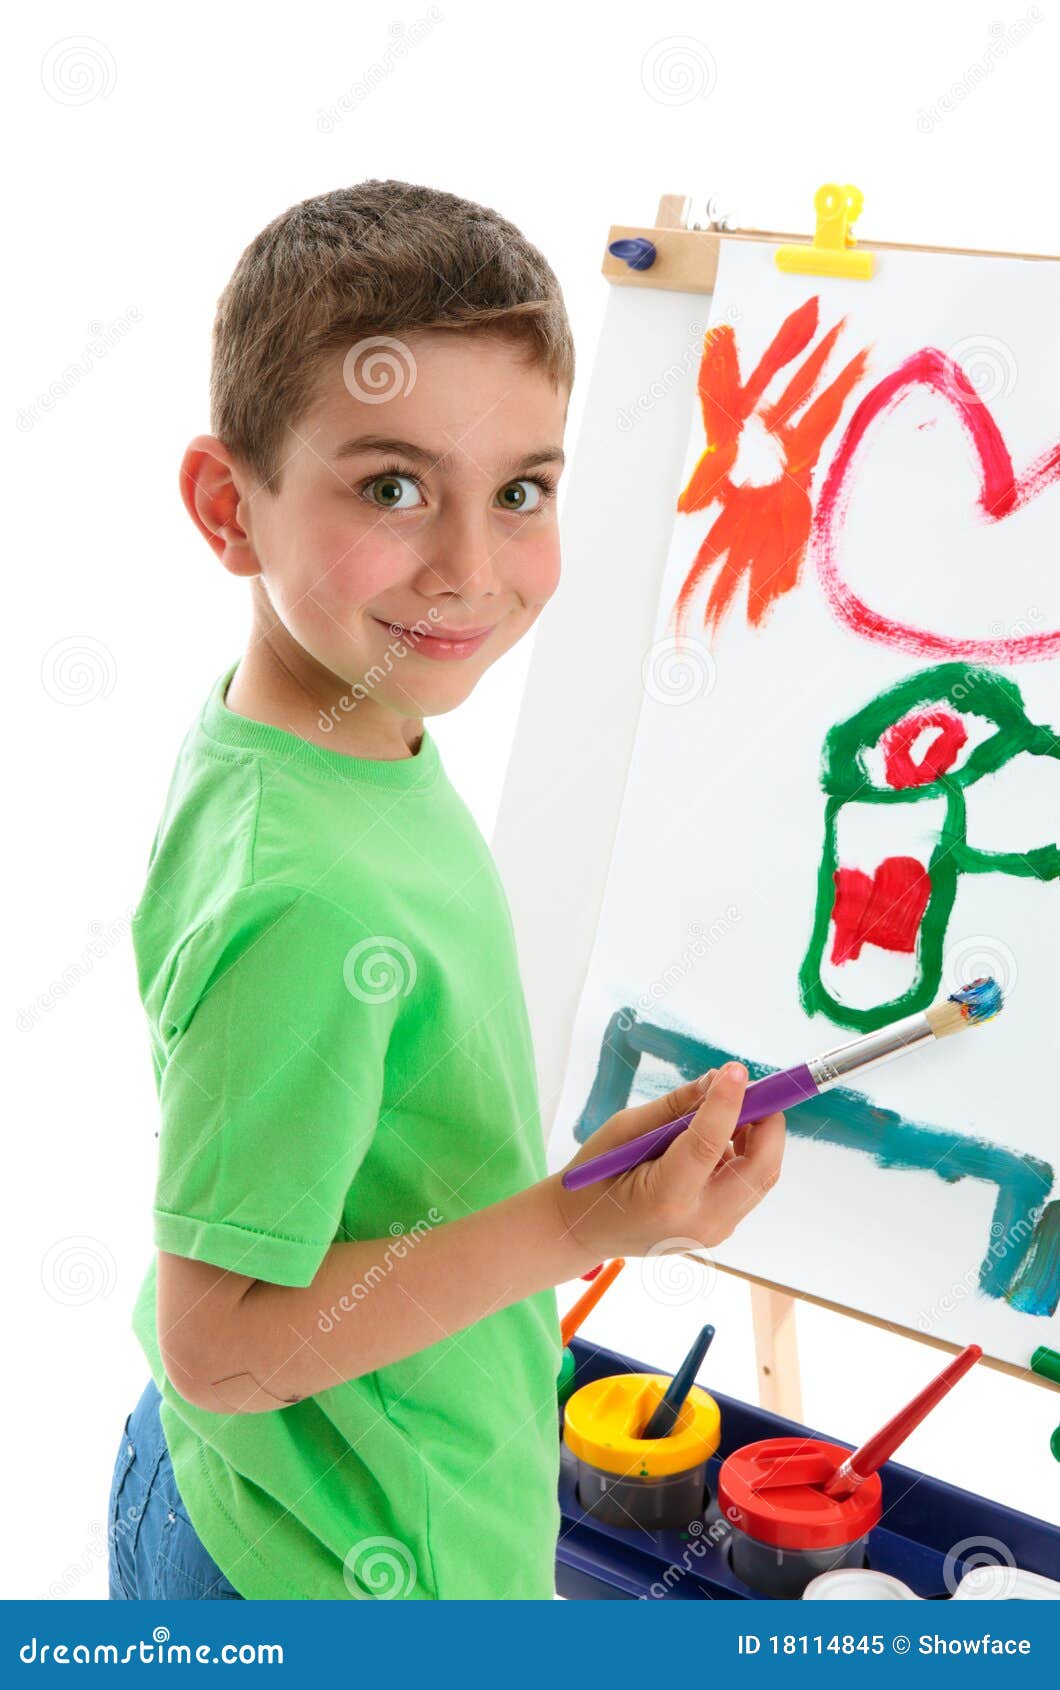 Young Boy Artist Painting At Easel Stock Image - Image of ...